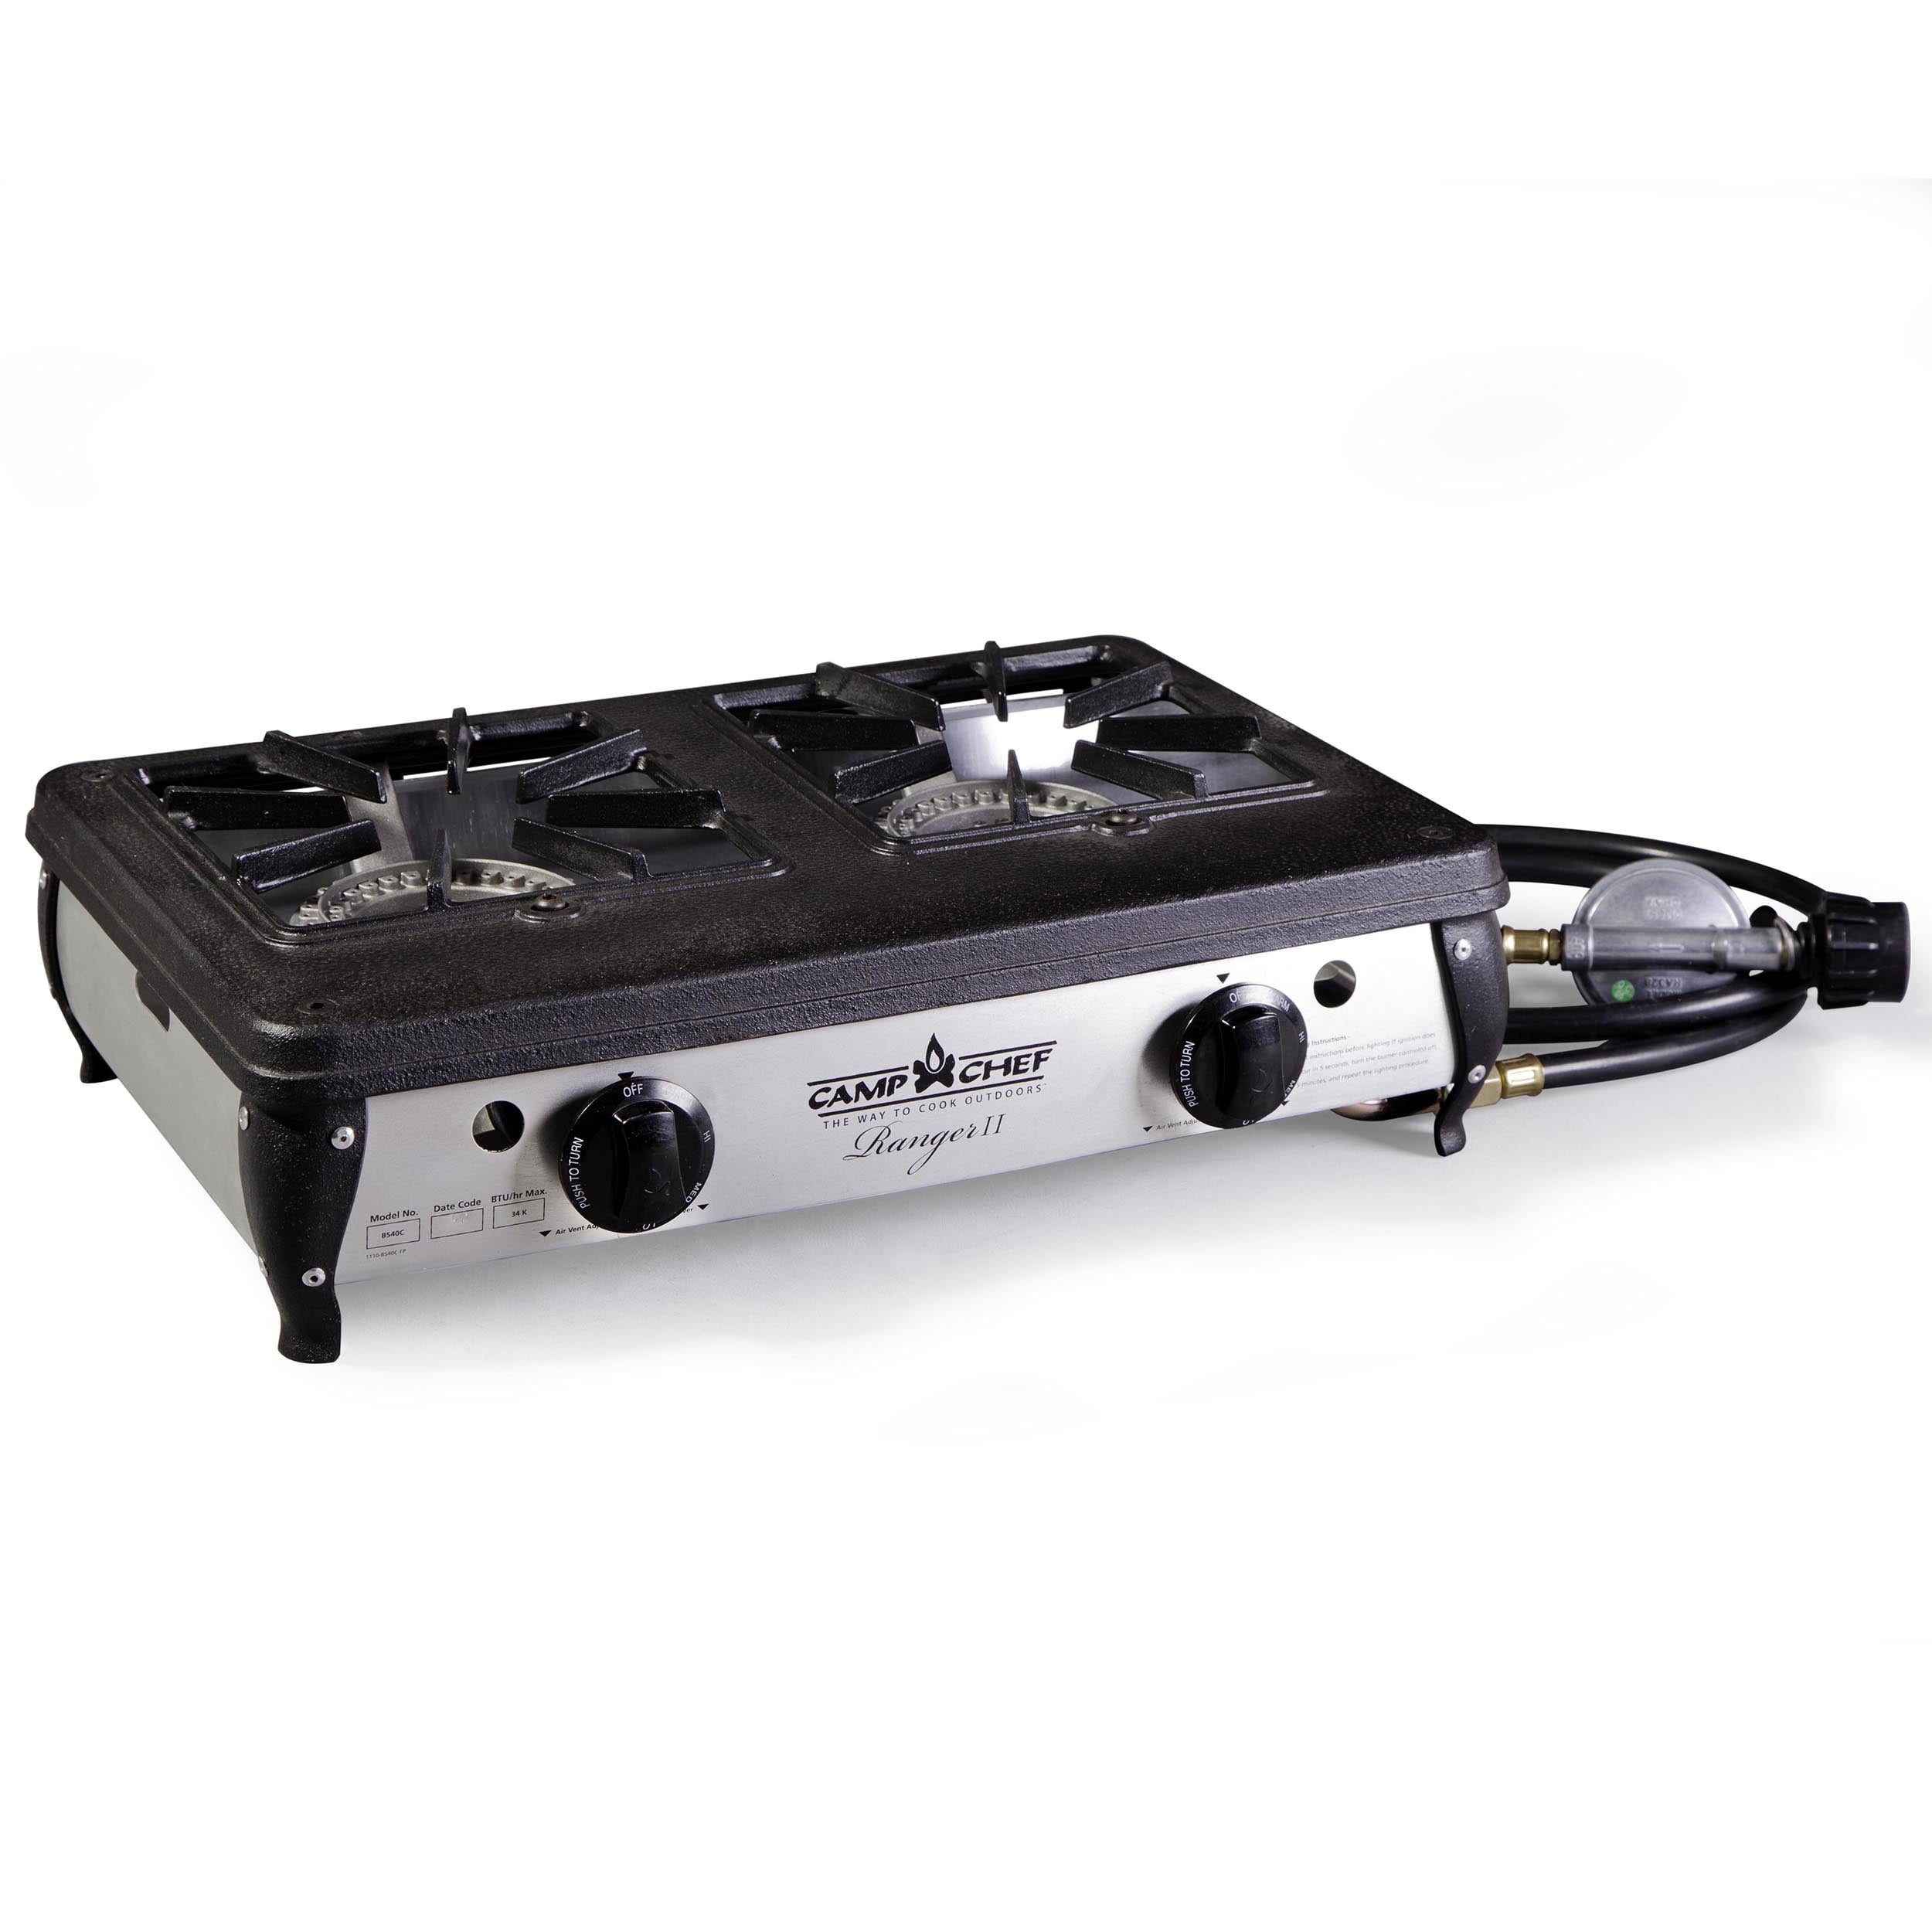 Portable Double Propane Gas 2 Burner Stove for Camping, Picnics, Tailgate,  and Contractors